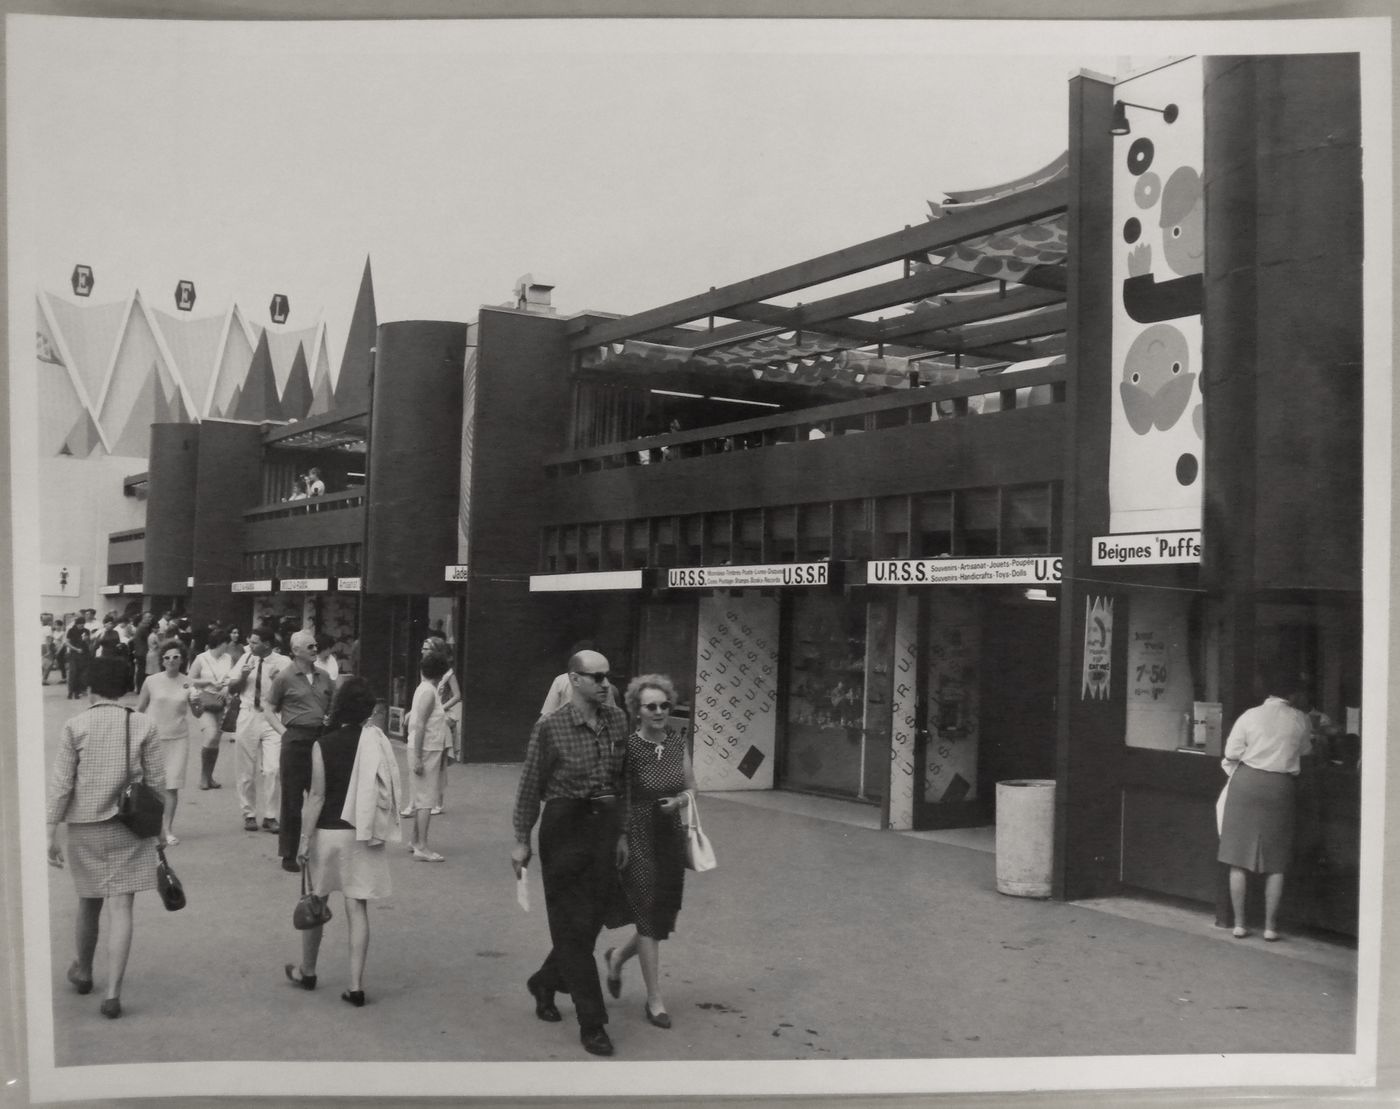 Partial view of the Expo-Express C with its boutiques and stores, Expo 67, Montréal, Québec